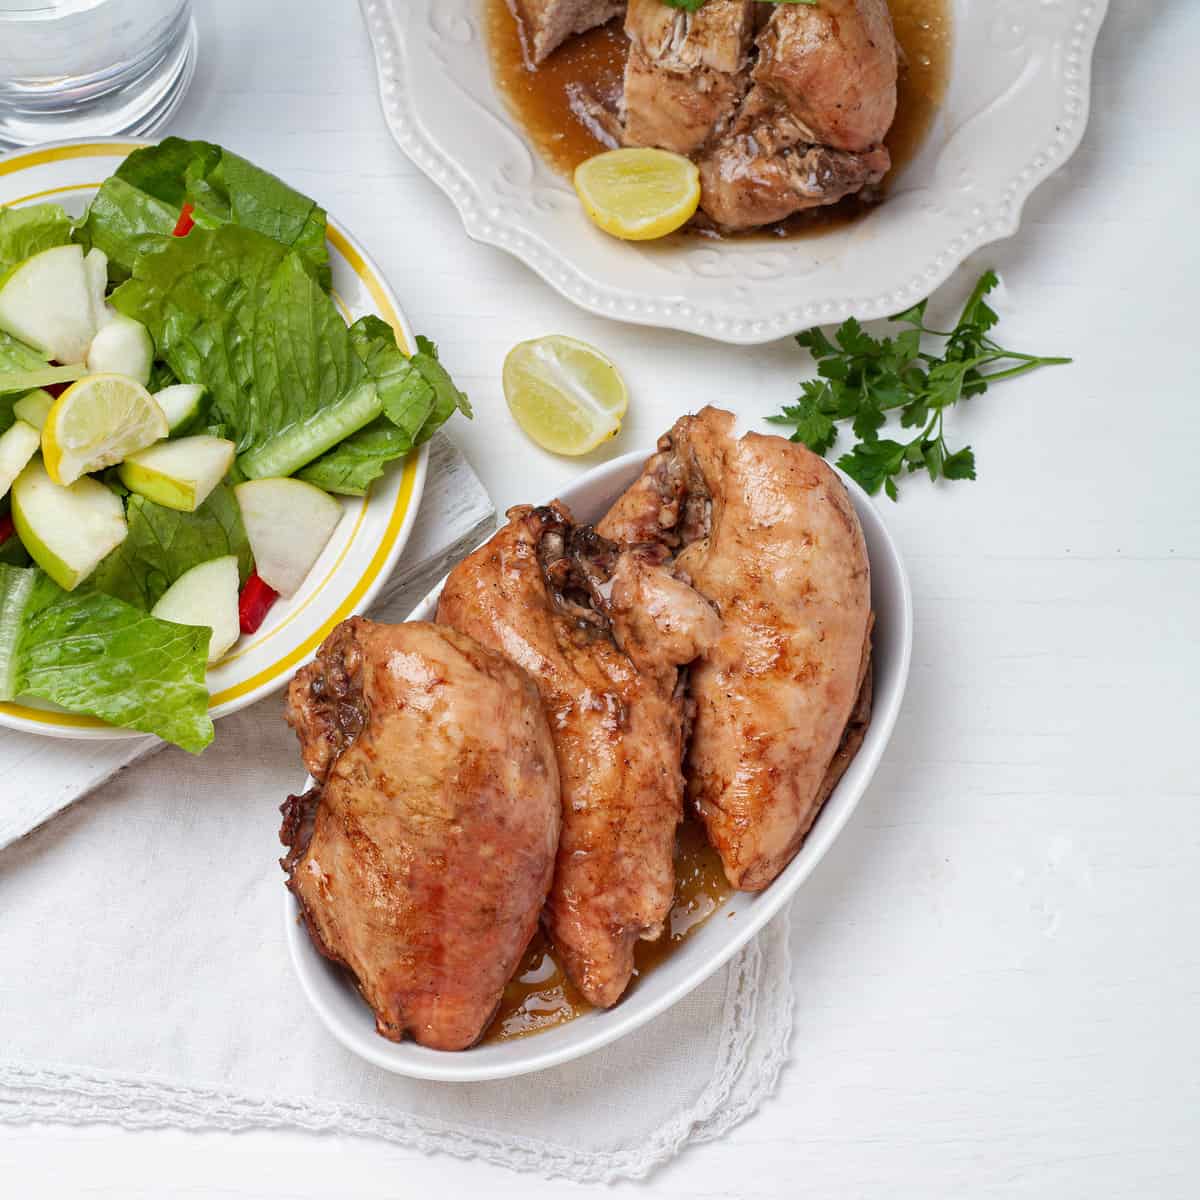 Apple Balsamic Chicken served on table with salad